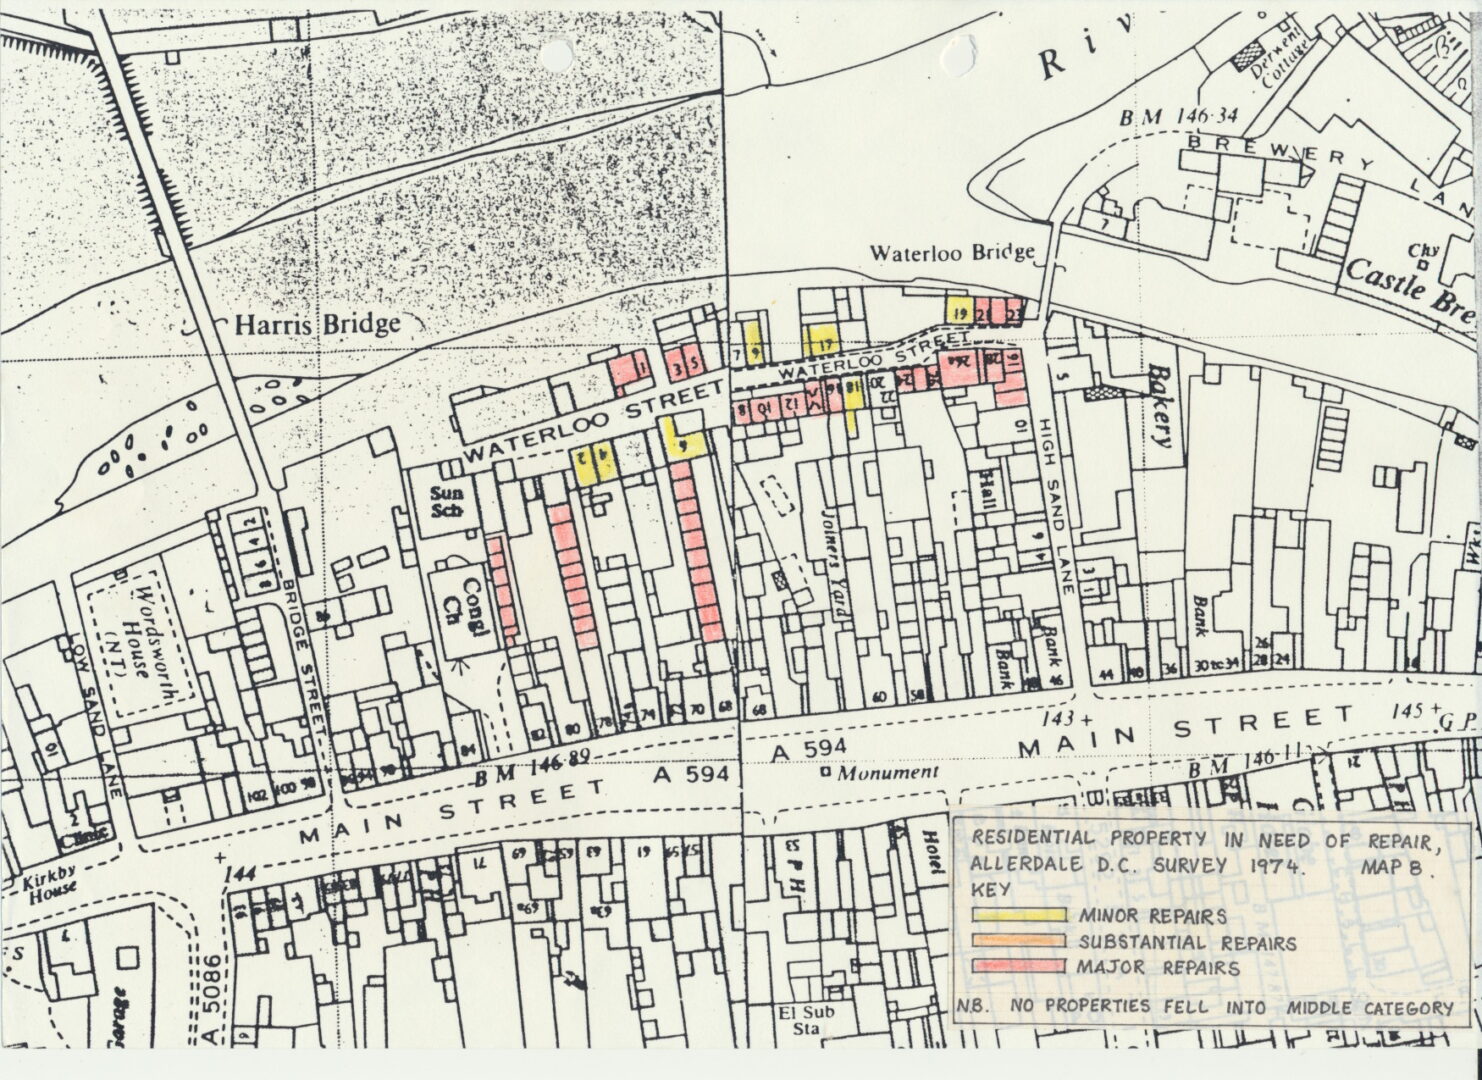 Map 08 Waterloo Street residential property in need of minor substantial and major repairs 1974 in survey of 1989 rotated